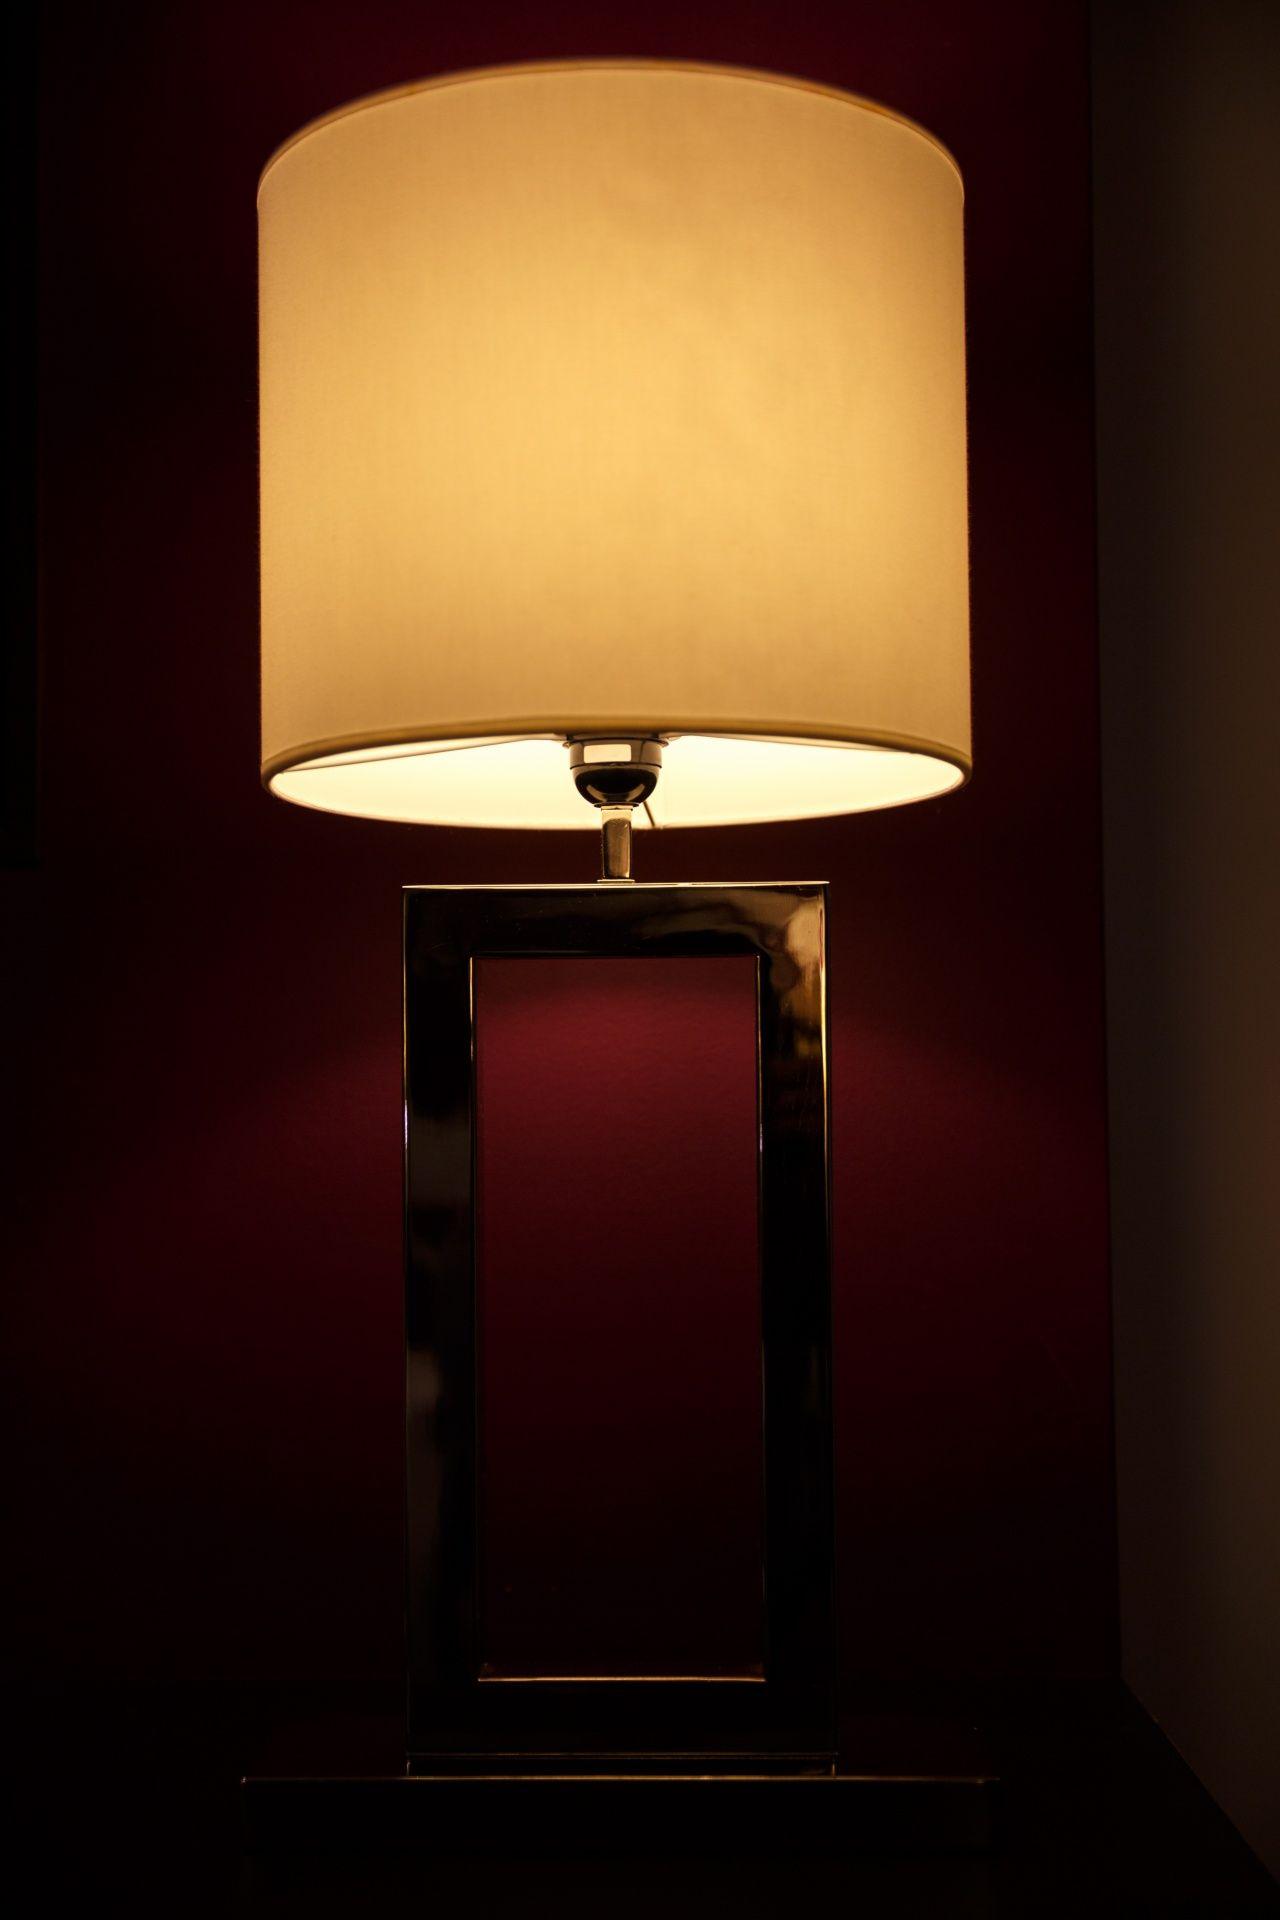 beautiful table lamp image download free high quality. HD